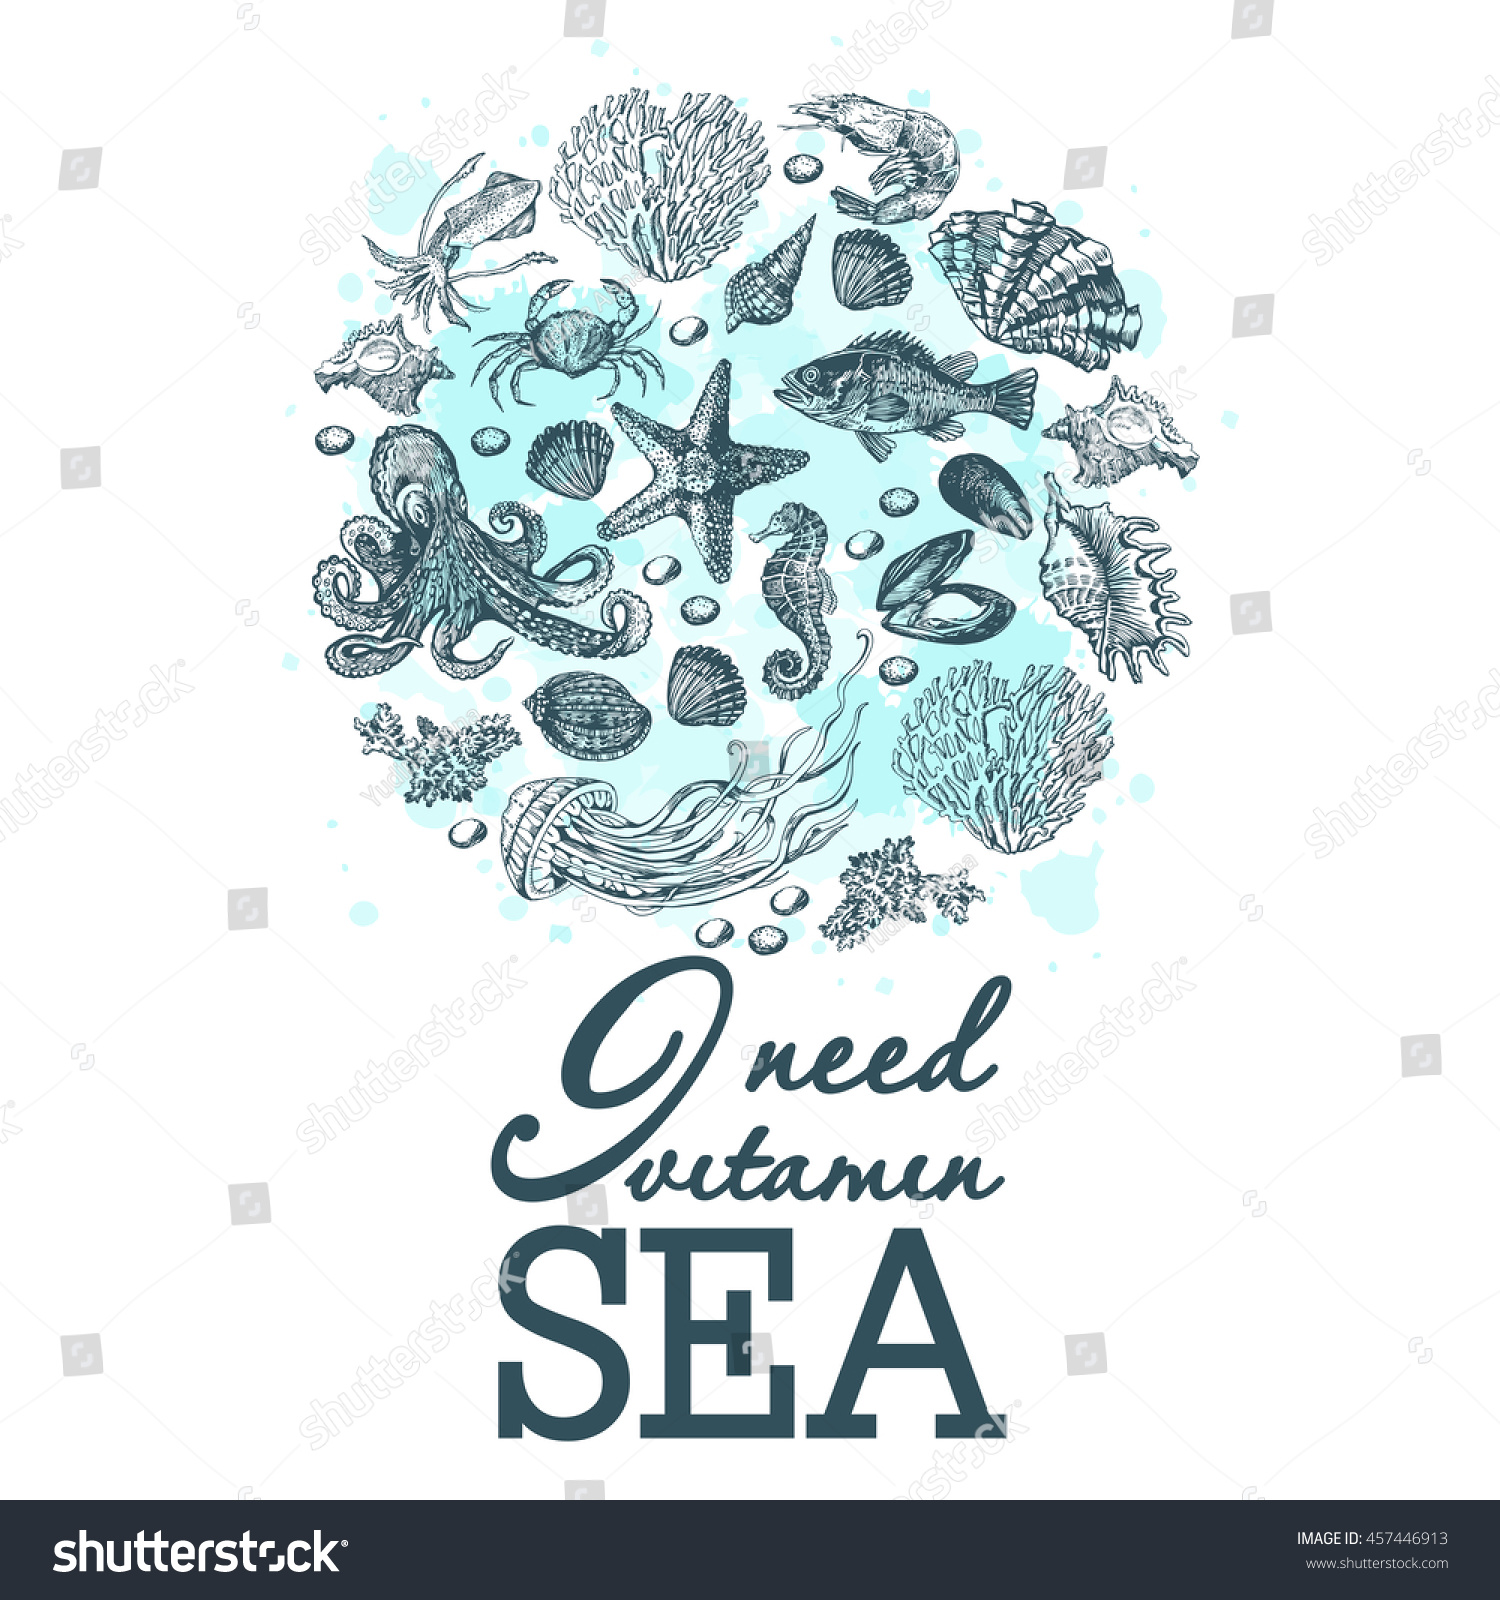 Stock Vector Marine Graphic Print With Watercolor Stains Print On The Marine Theme Illustration For Greeting 457446913 